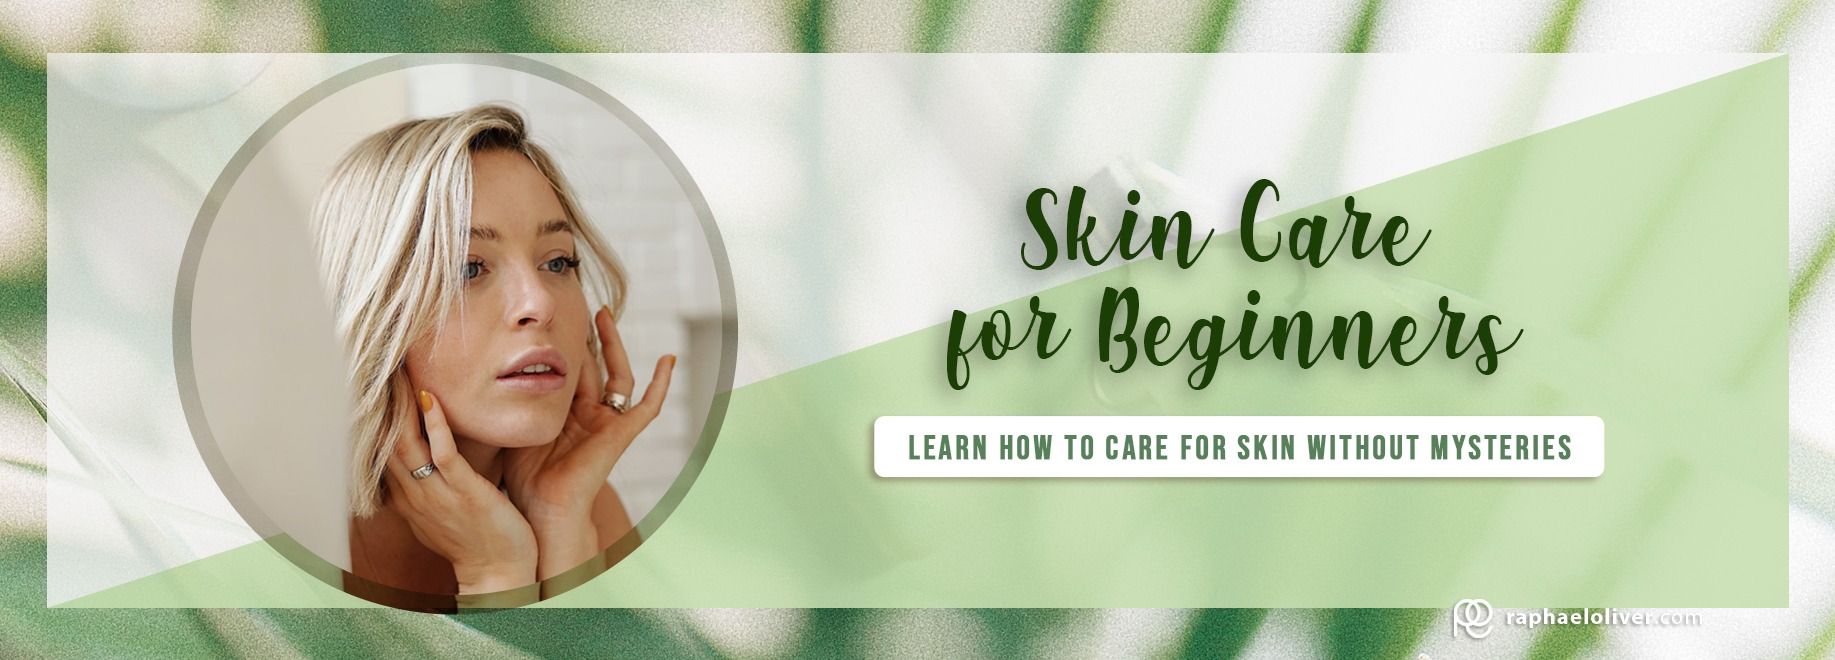 Skin Care For Beginners: Learn How To Take Care Of The Skin Without Mysteries